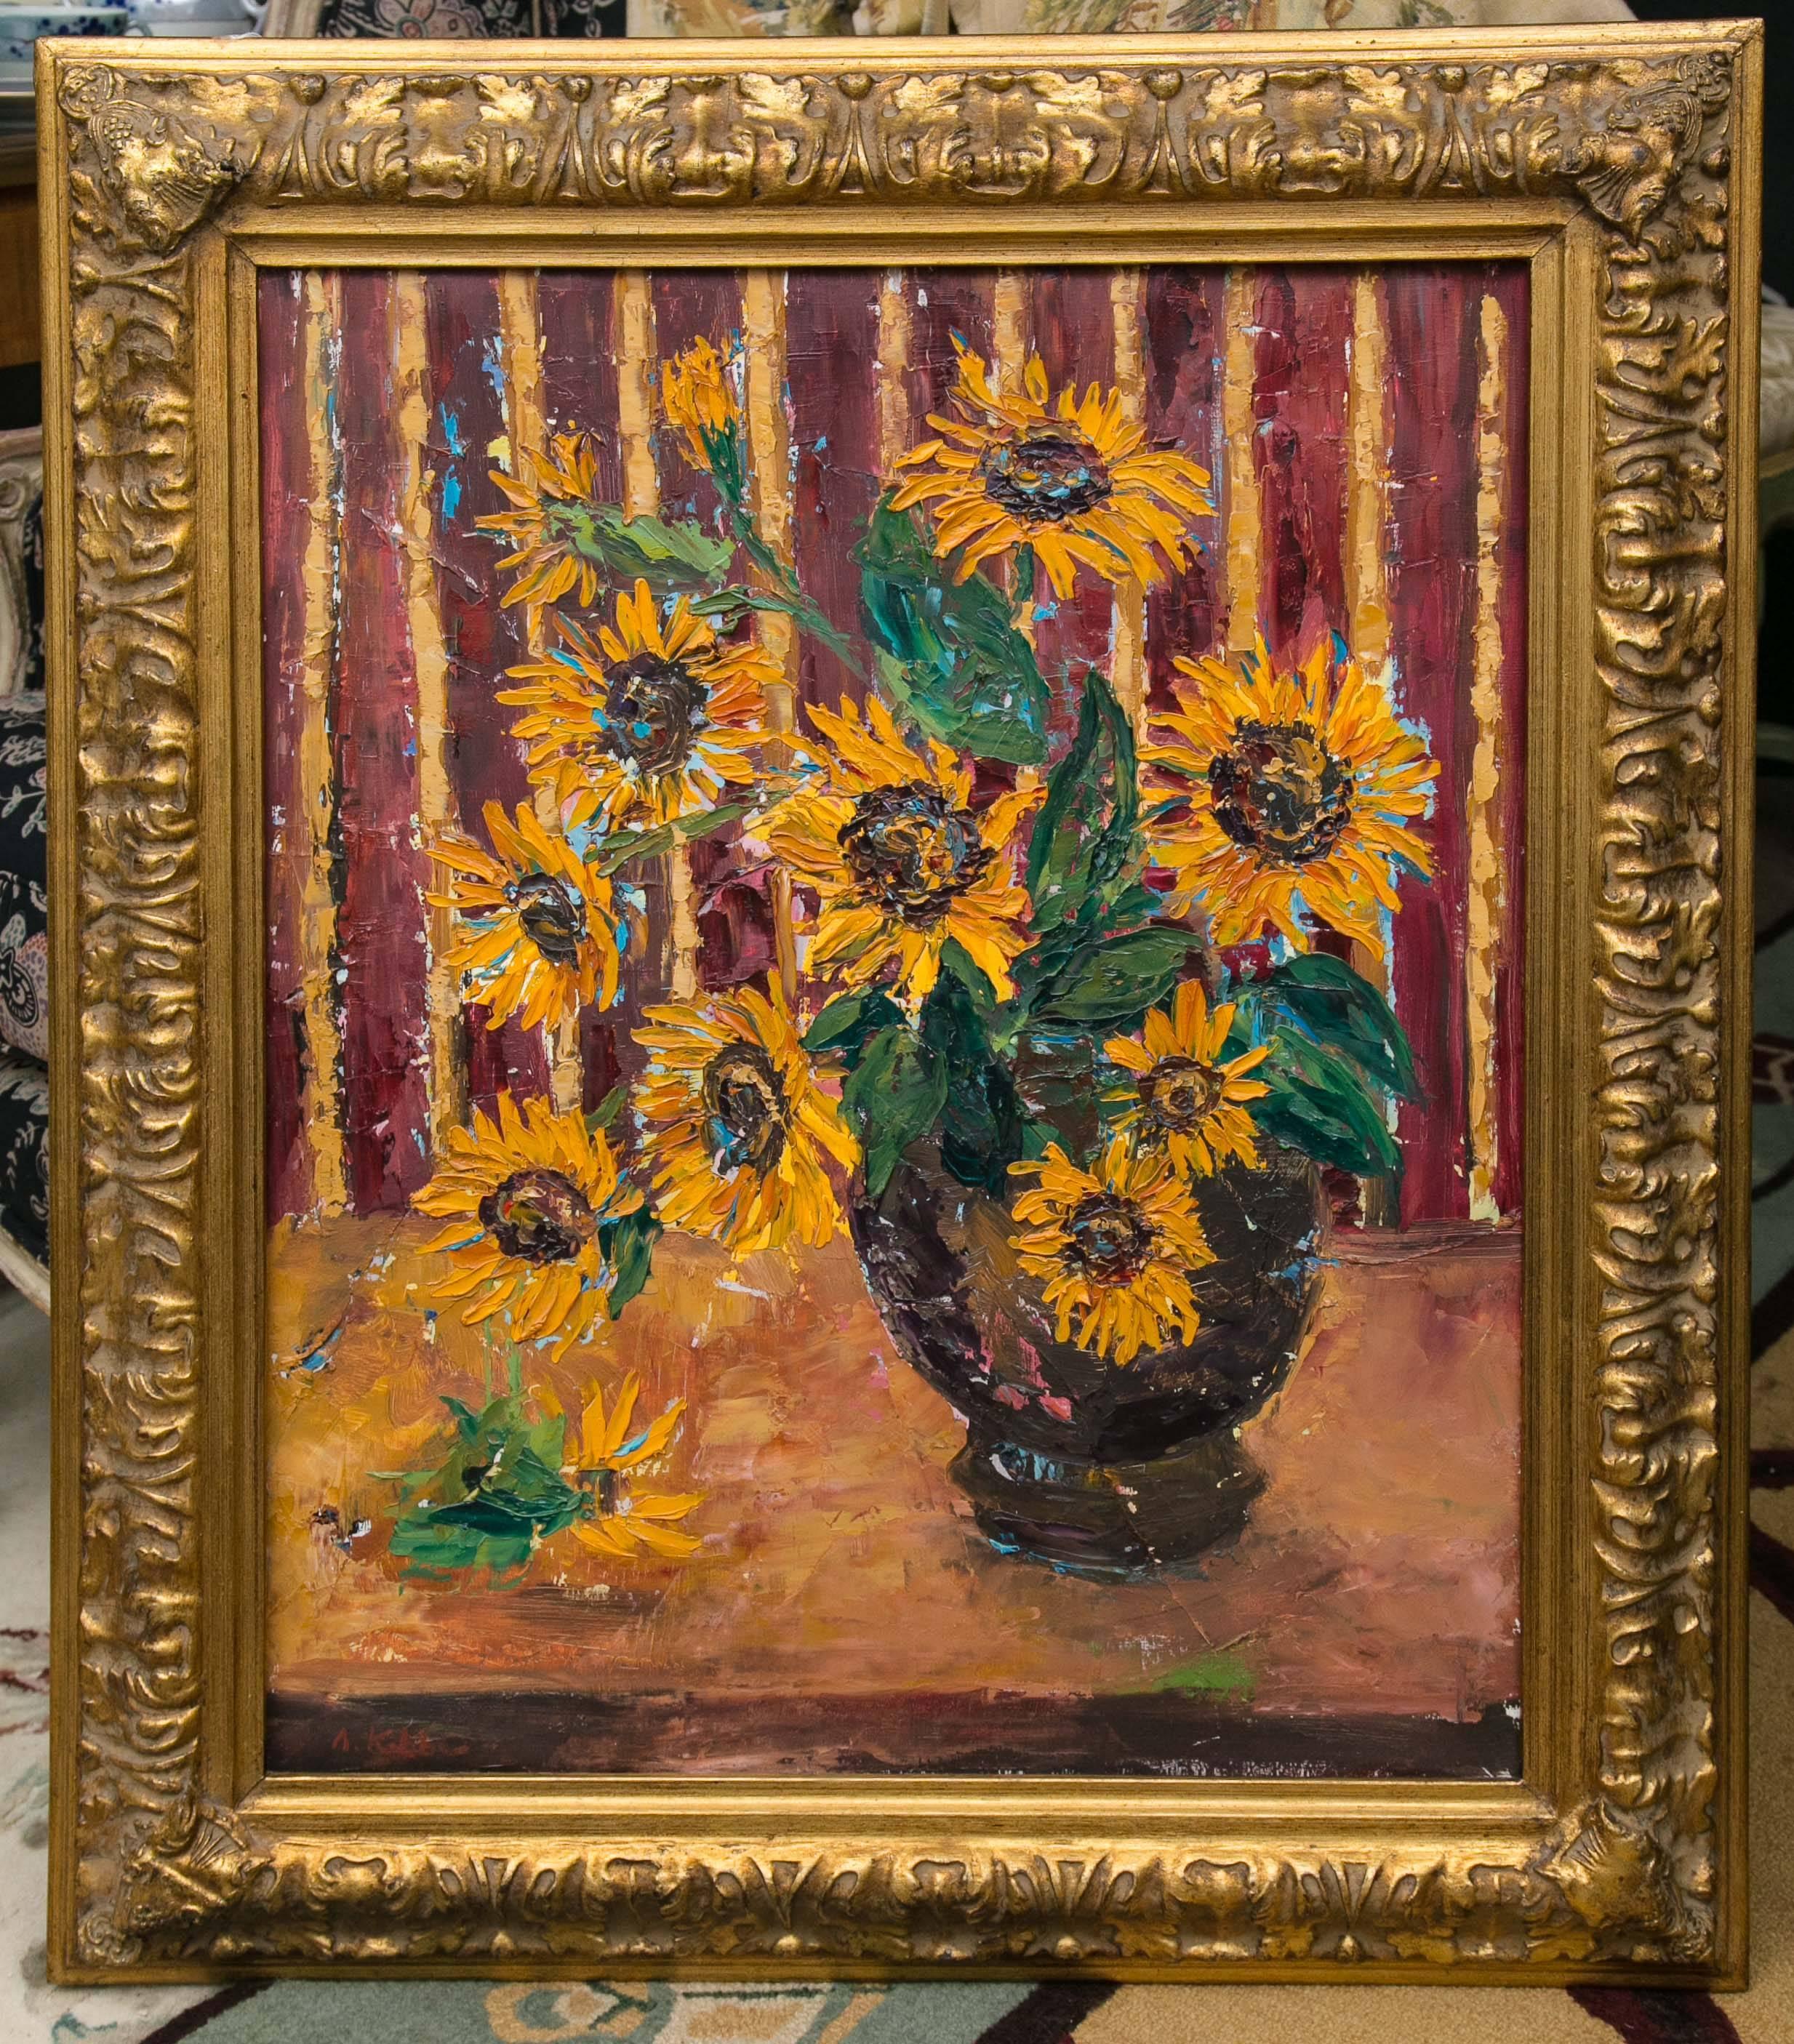 Allison Kibbe oil on canvas sunflowers and vase in gilt frame. Vibrant and beautiful colors - A fisher island New York native - Allison Kibbe's art is done with a palette knife and always in vibrant tones paying fine attention to the care of the